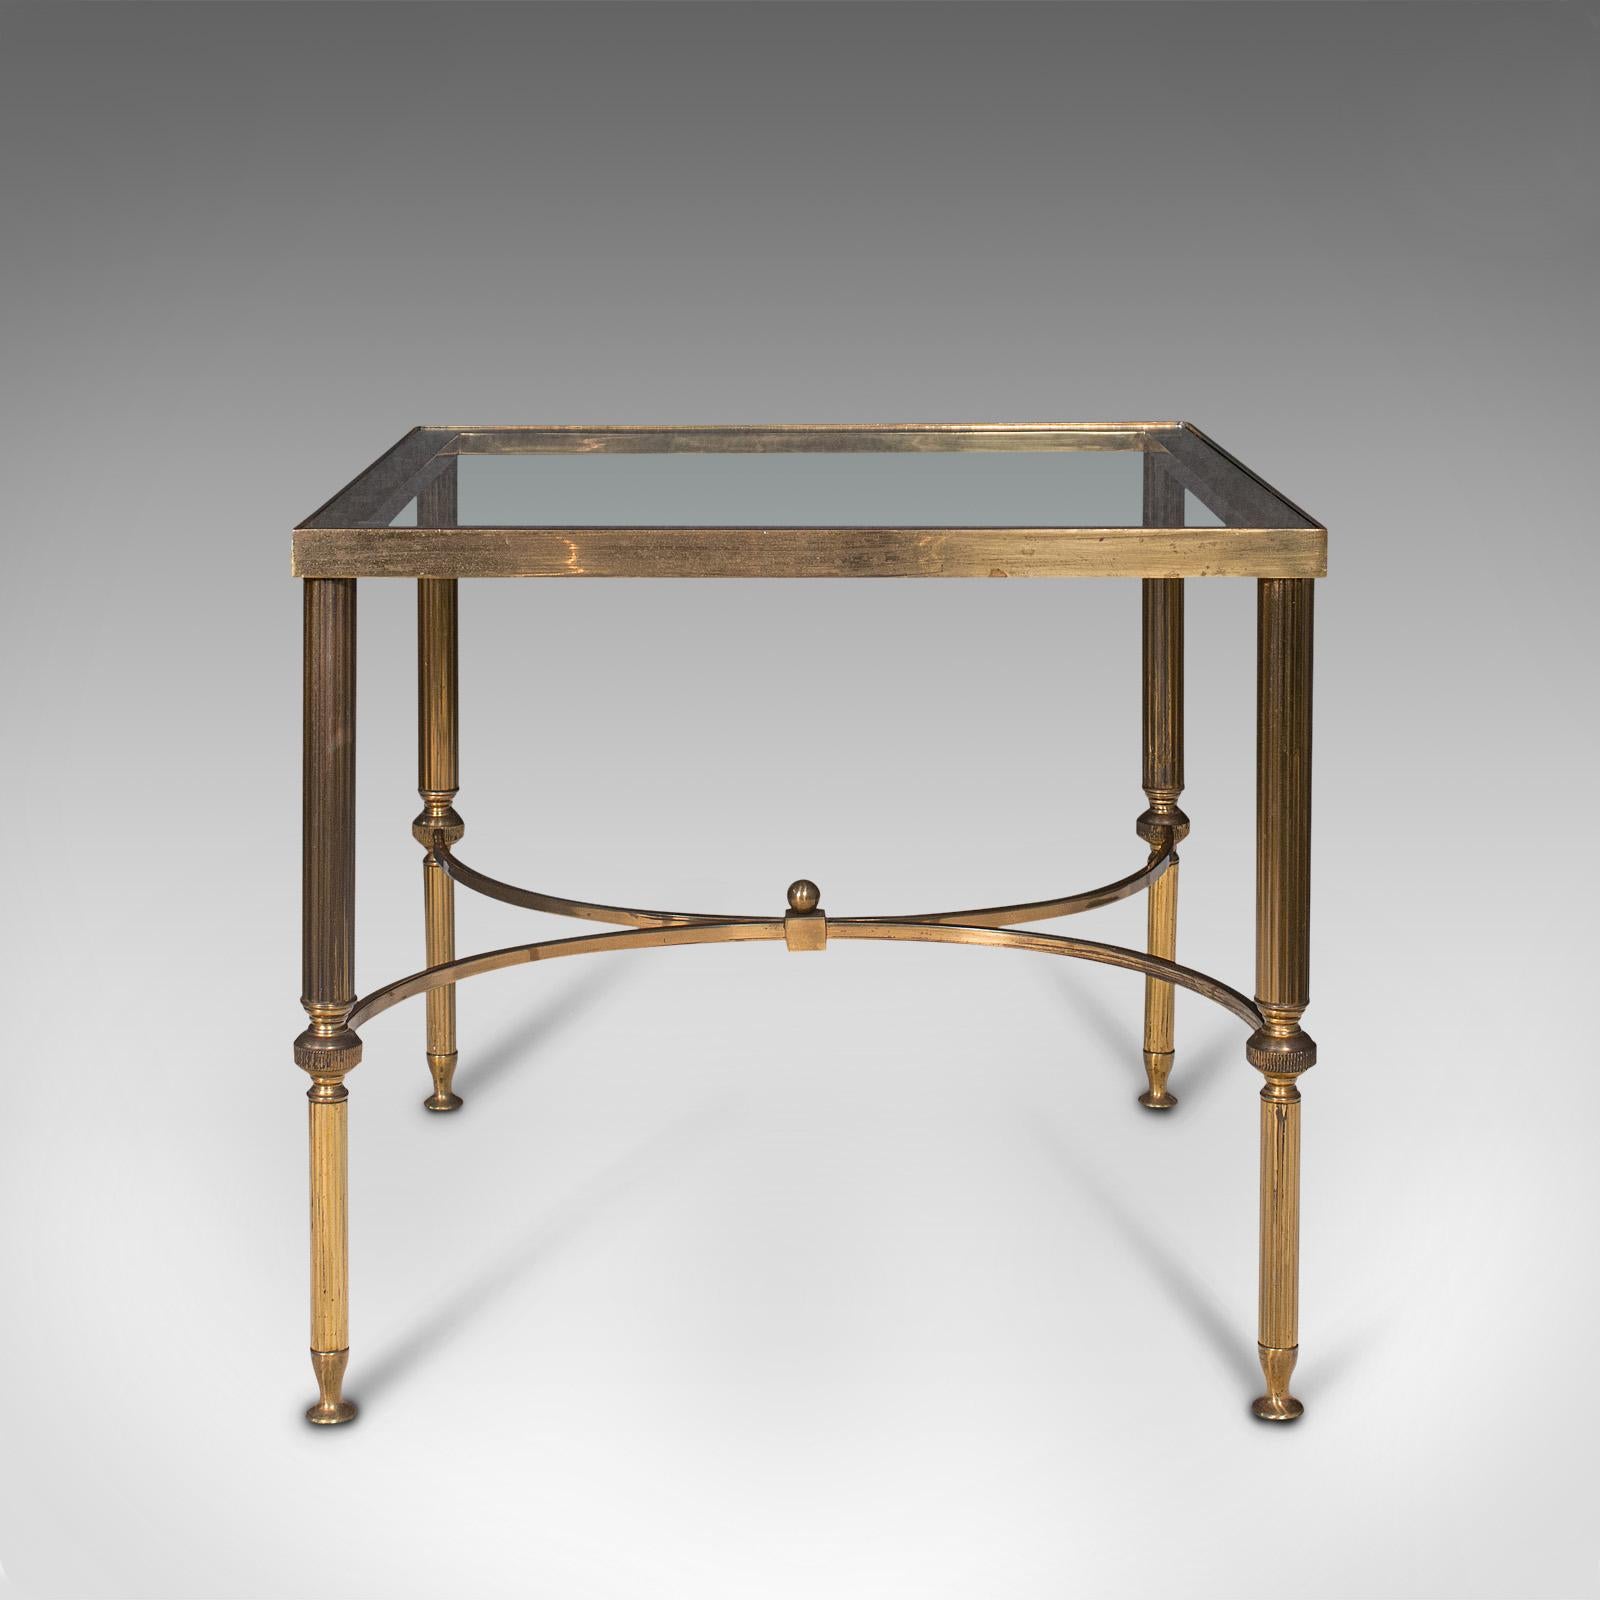 This is a vintage lounge coffee table. A French, brass and glass occasional table, dating to the late 20th century, circa 1970.

Striking tonality with overtones of Empire and Art Deco taste
Displays a desirable aged patina throughout
Polished